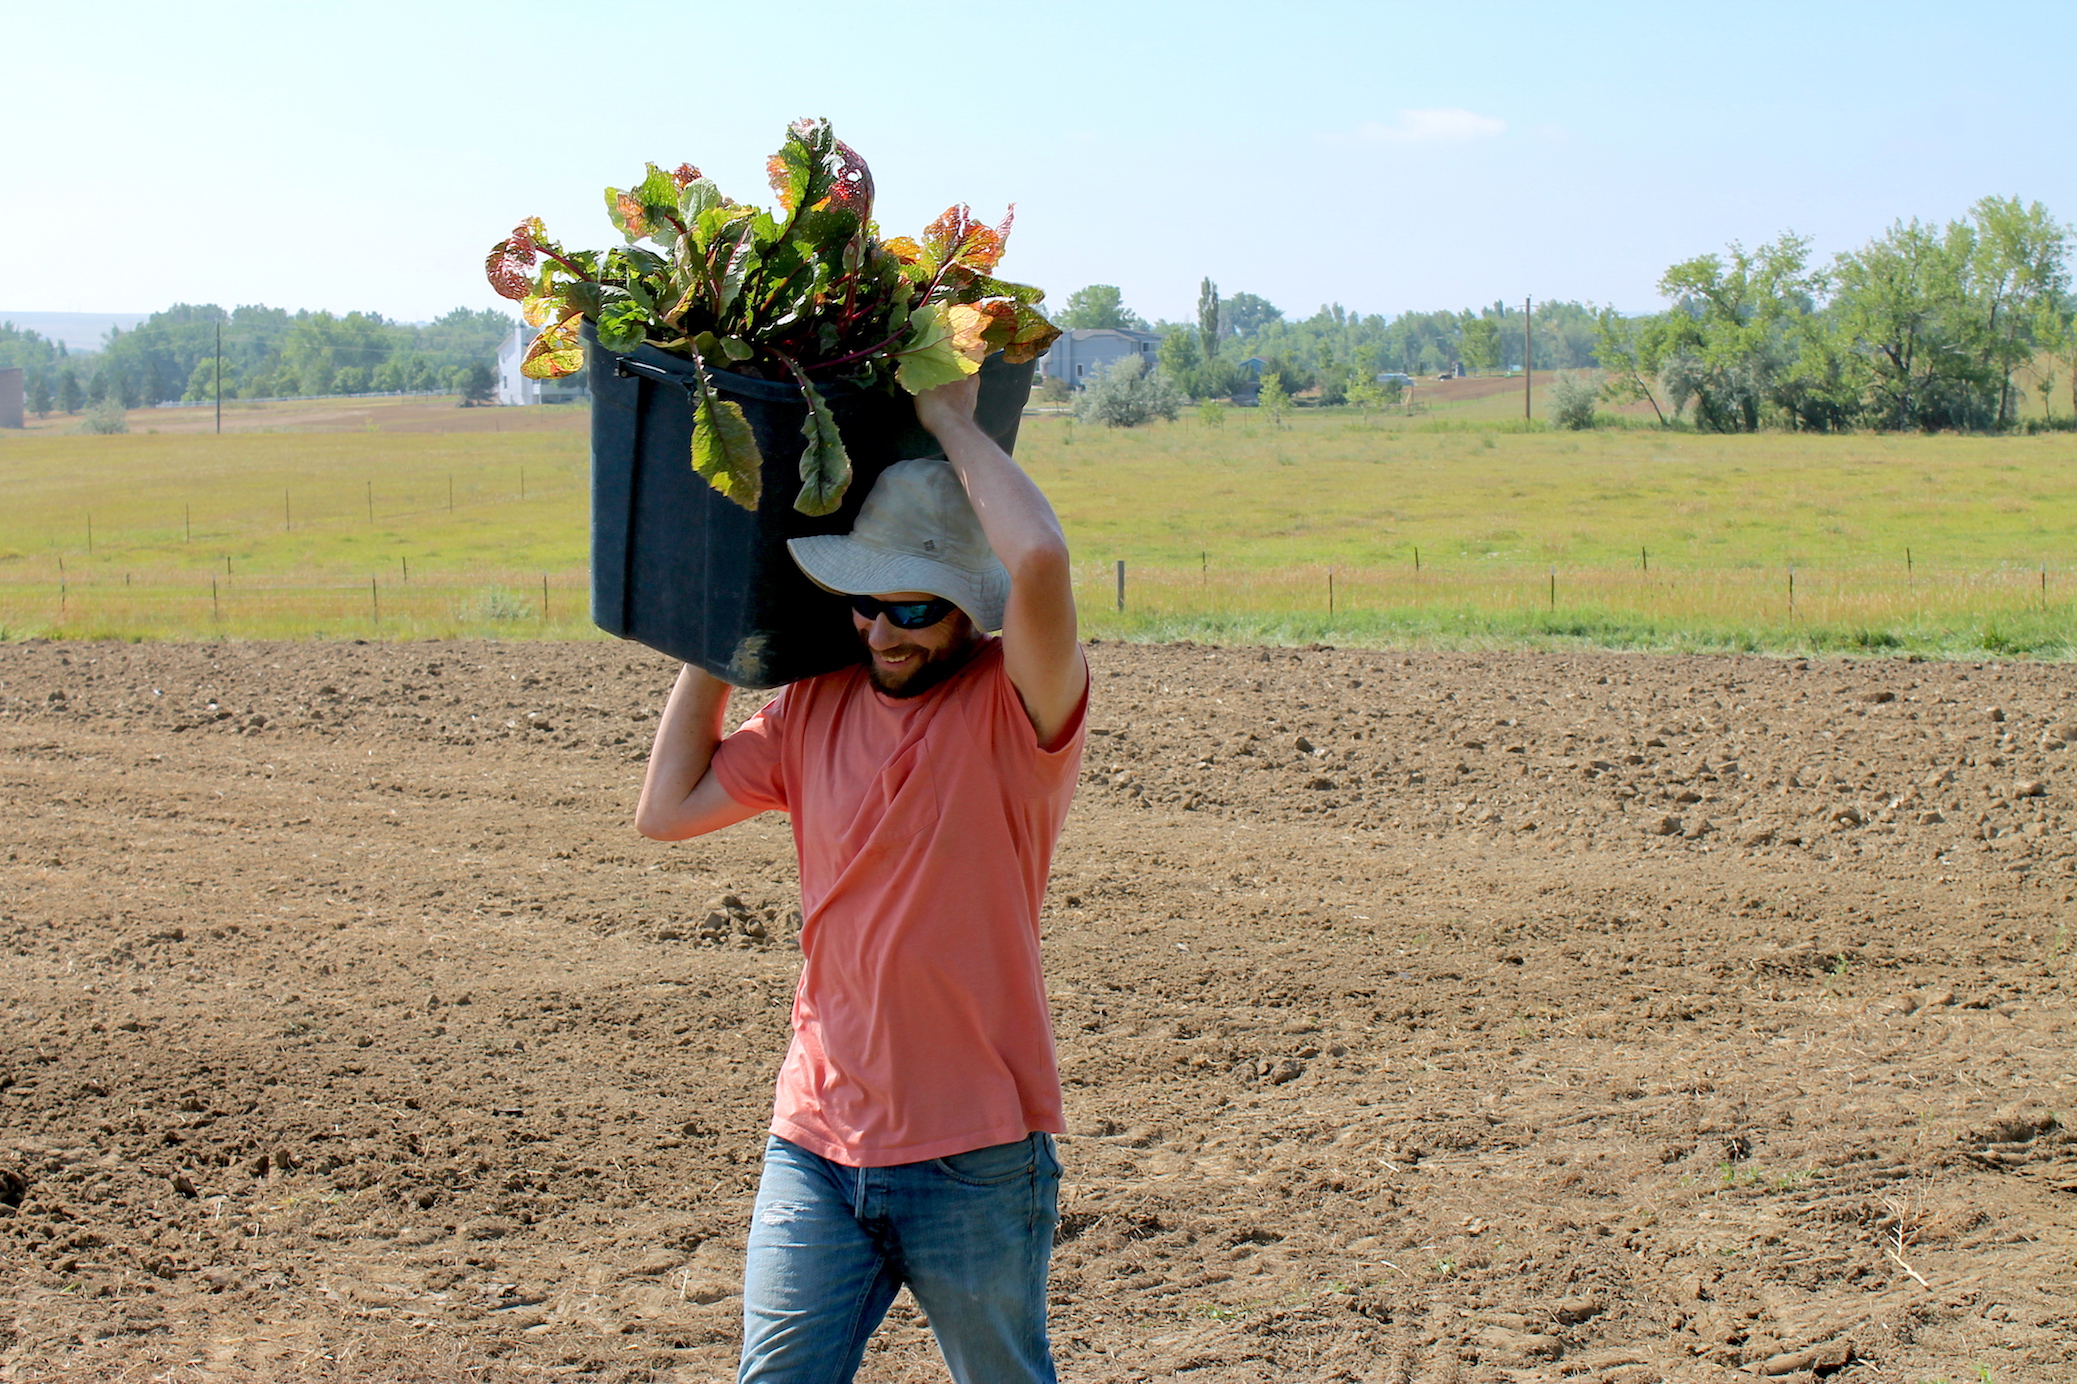 Jake hauling beets from the field to the washing station.